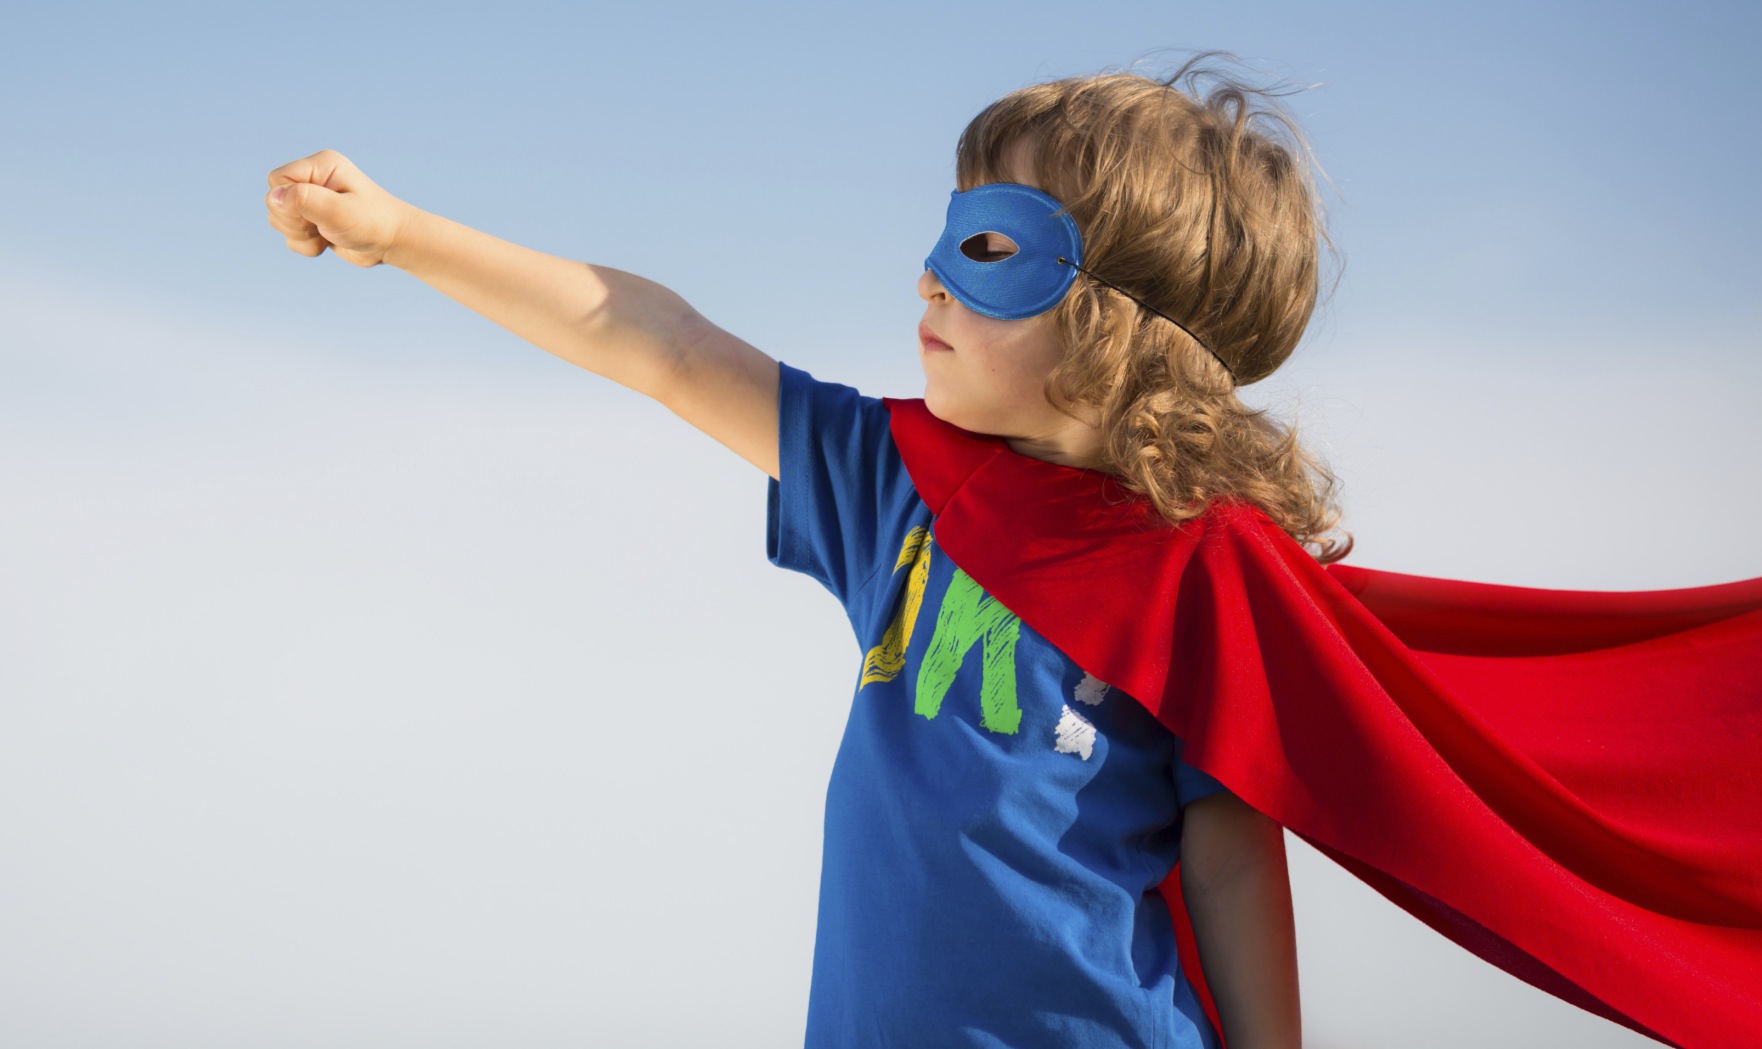 Pose Super Heroe: Over 7,727 Royalty-Free Licensable Stock Photos |  Shutterstock